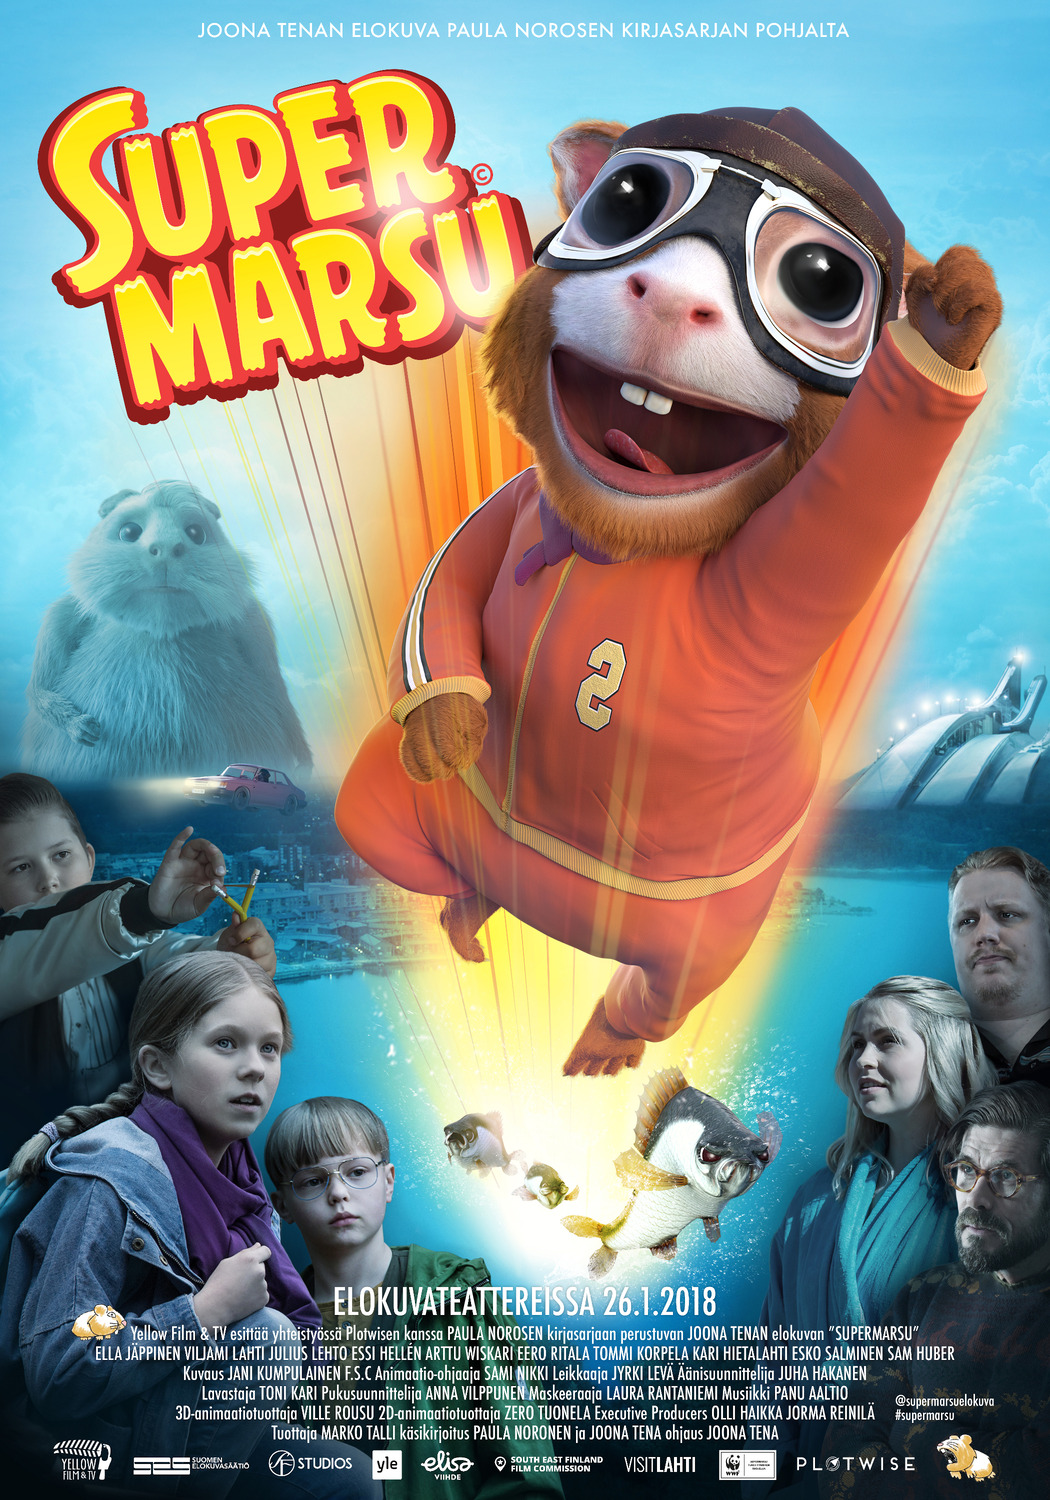 Extra Large Movie Poster Image for Supermarsu 